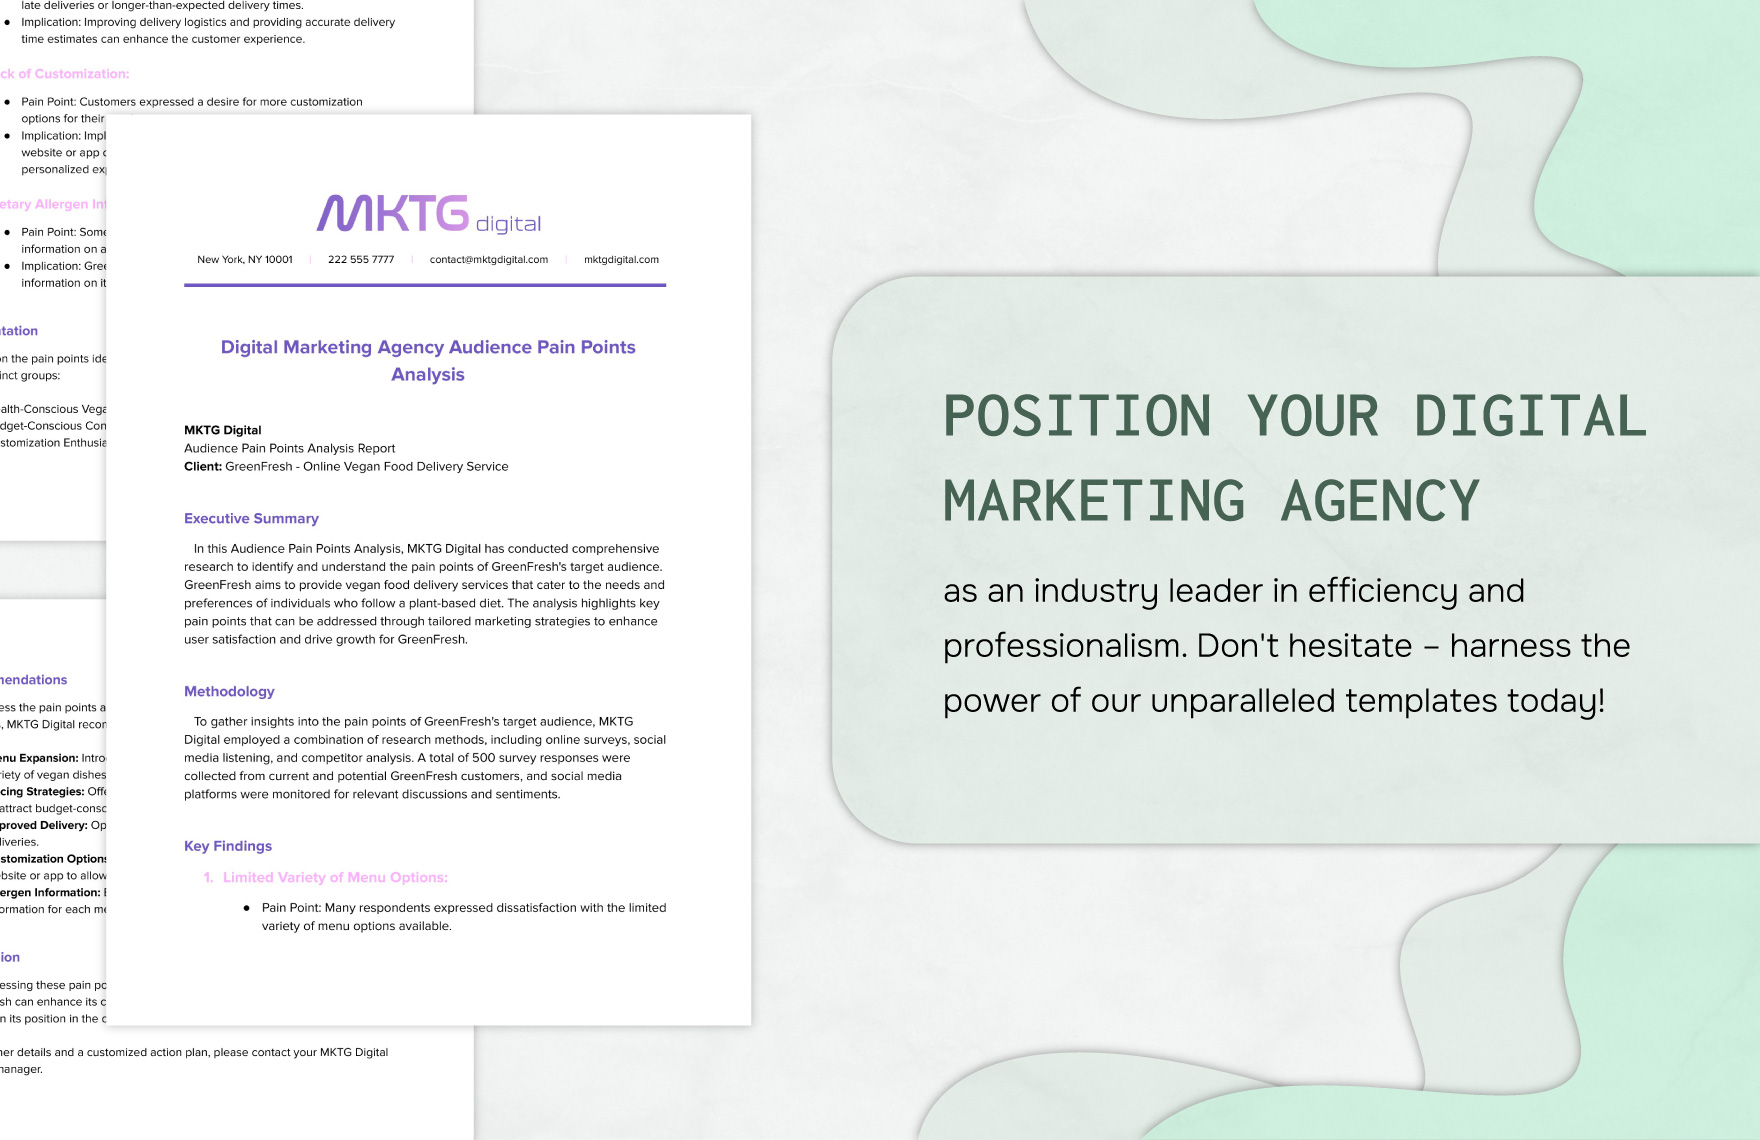 Digital Marketing Agency Audience Pain Points Analysis Template